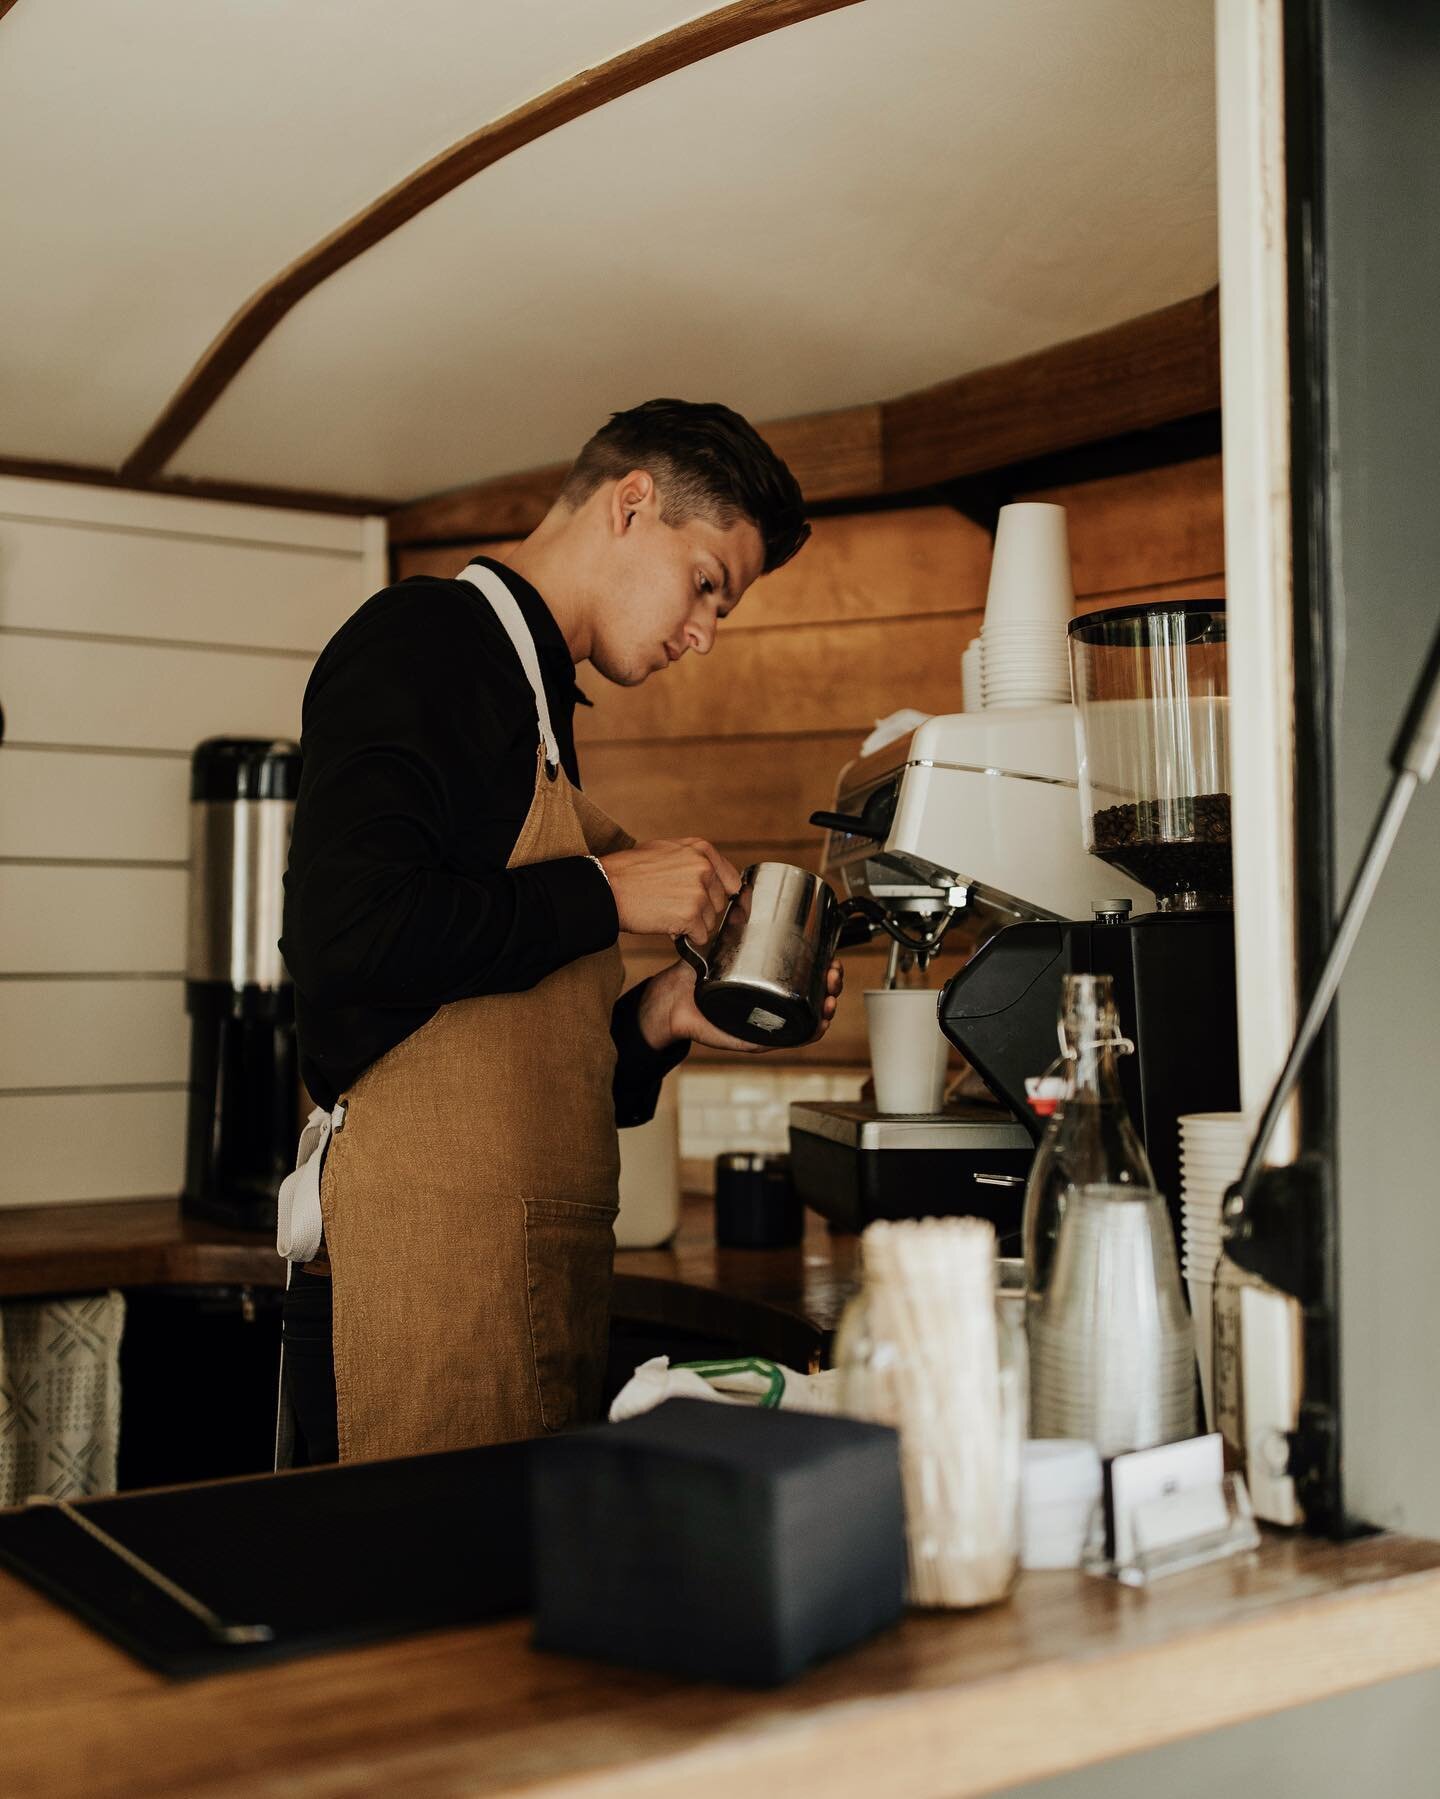 Our Coffee + Espresso services are unlike any others. Why? We have a team of talented and skilled baristas who take the time to craft each latte, americano, and every drink for our clients to enjoy. ☕️ link in bio to take your event to the next level